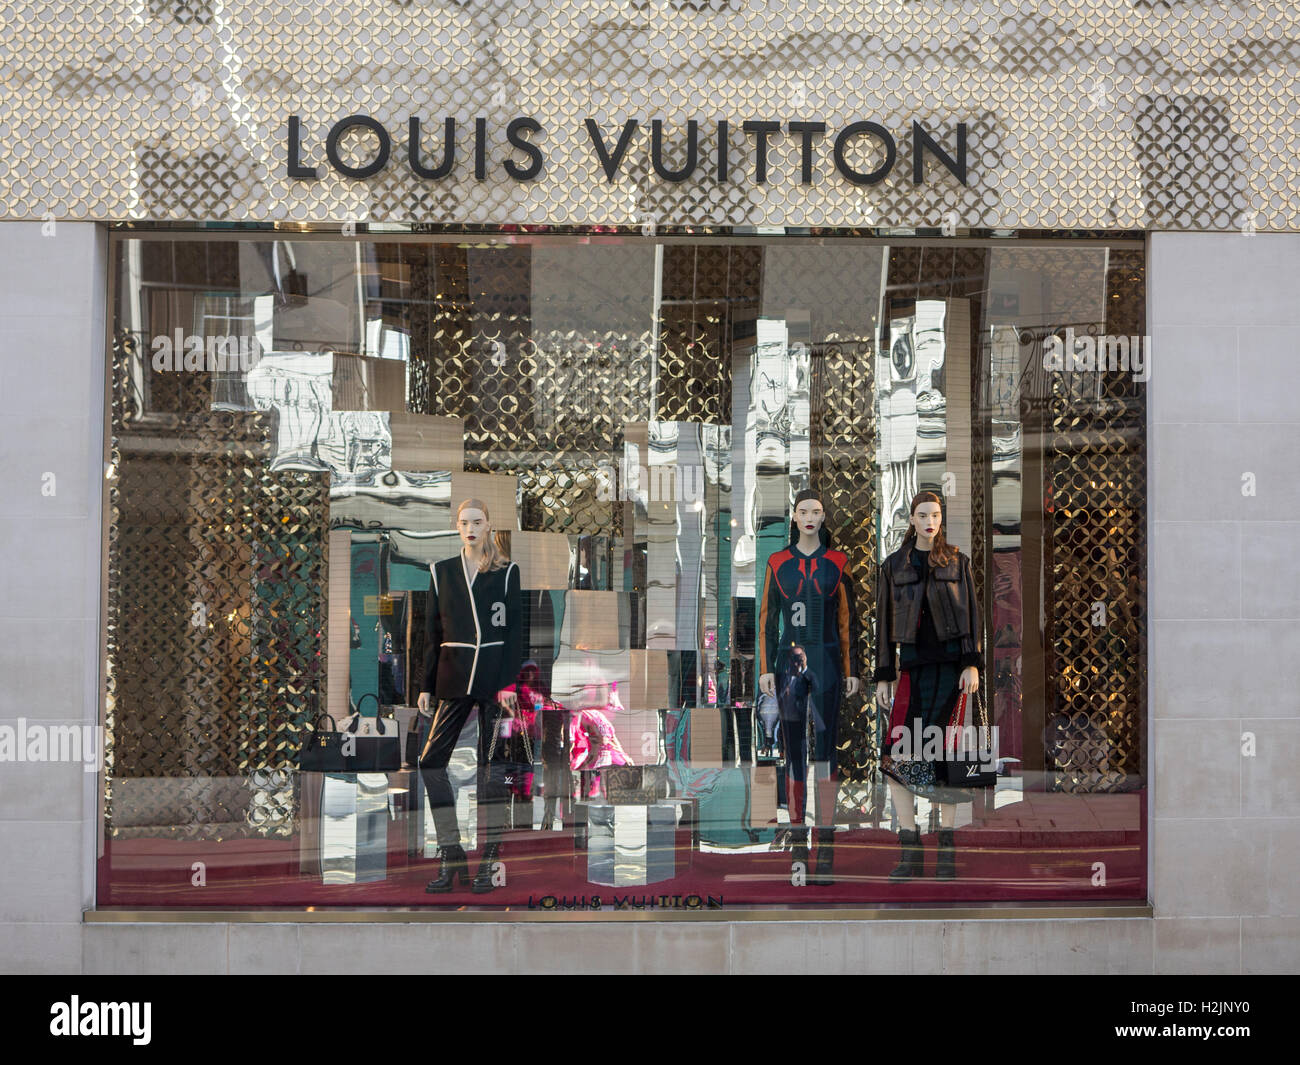 Louis Vuitton building and offices, London Bond Street Stock Photo